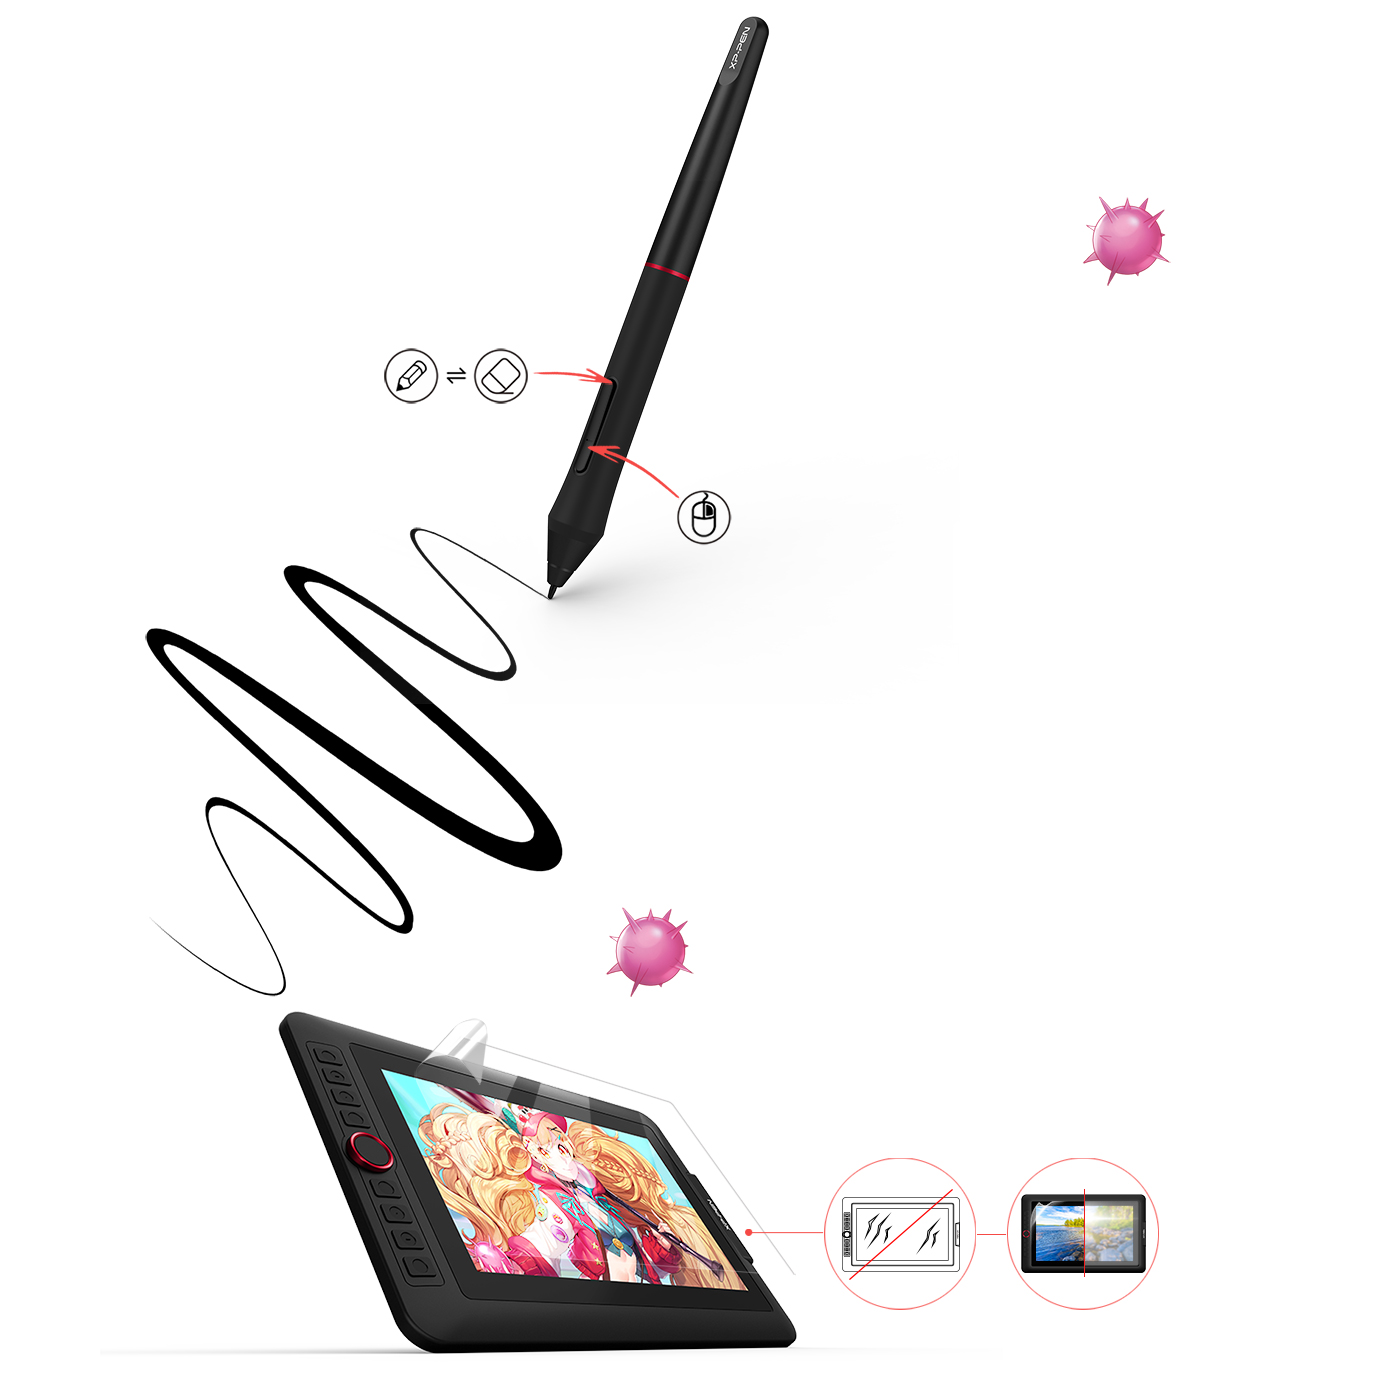 PC/タブレット PC周辺機器 Artist 13.3 Pro affordable display graphic tablet | XPPen